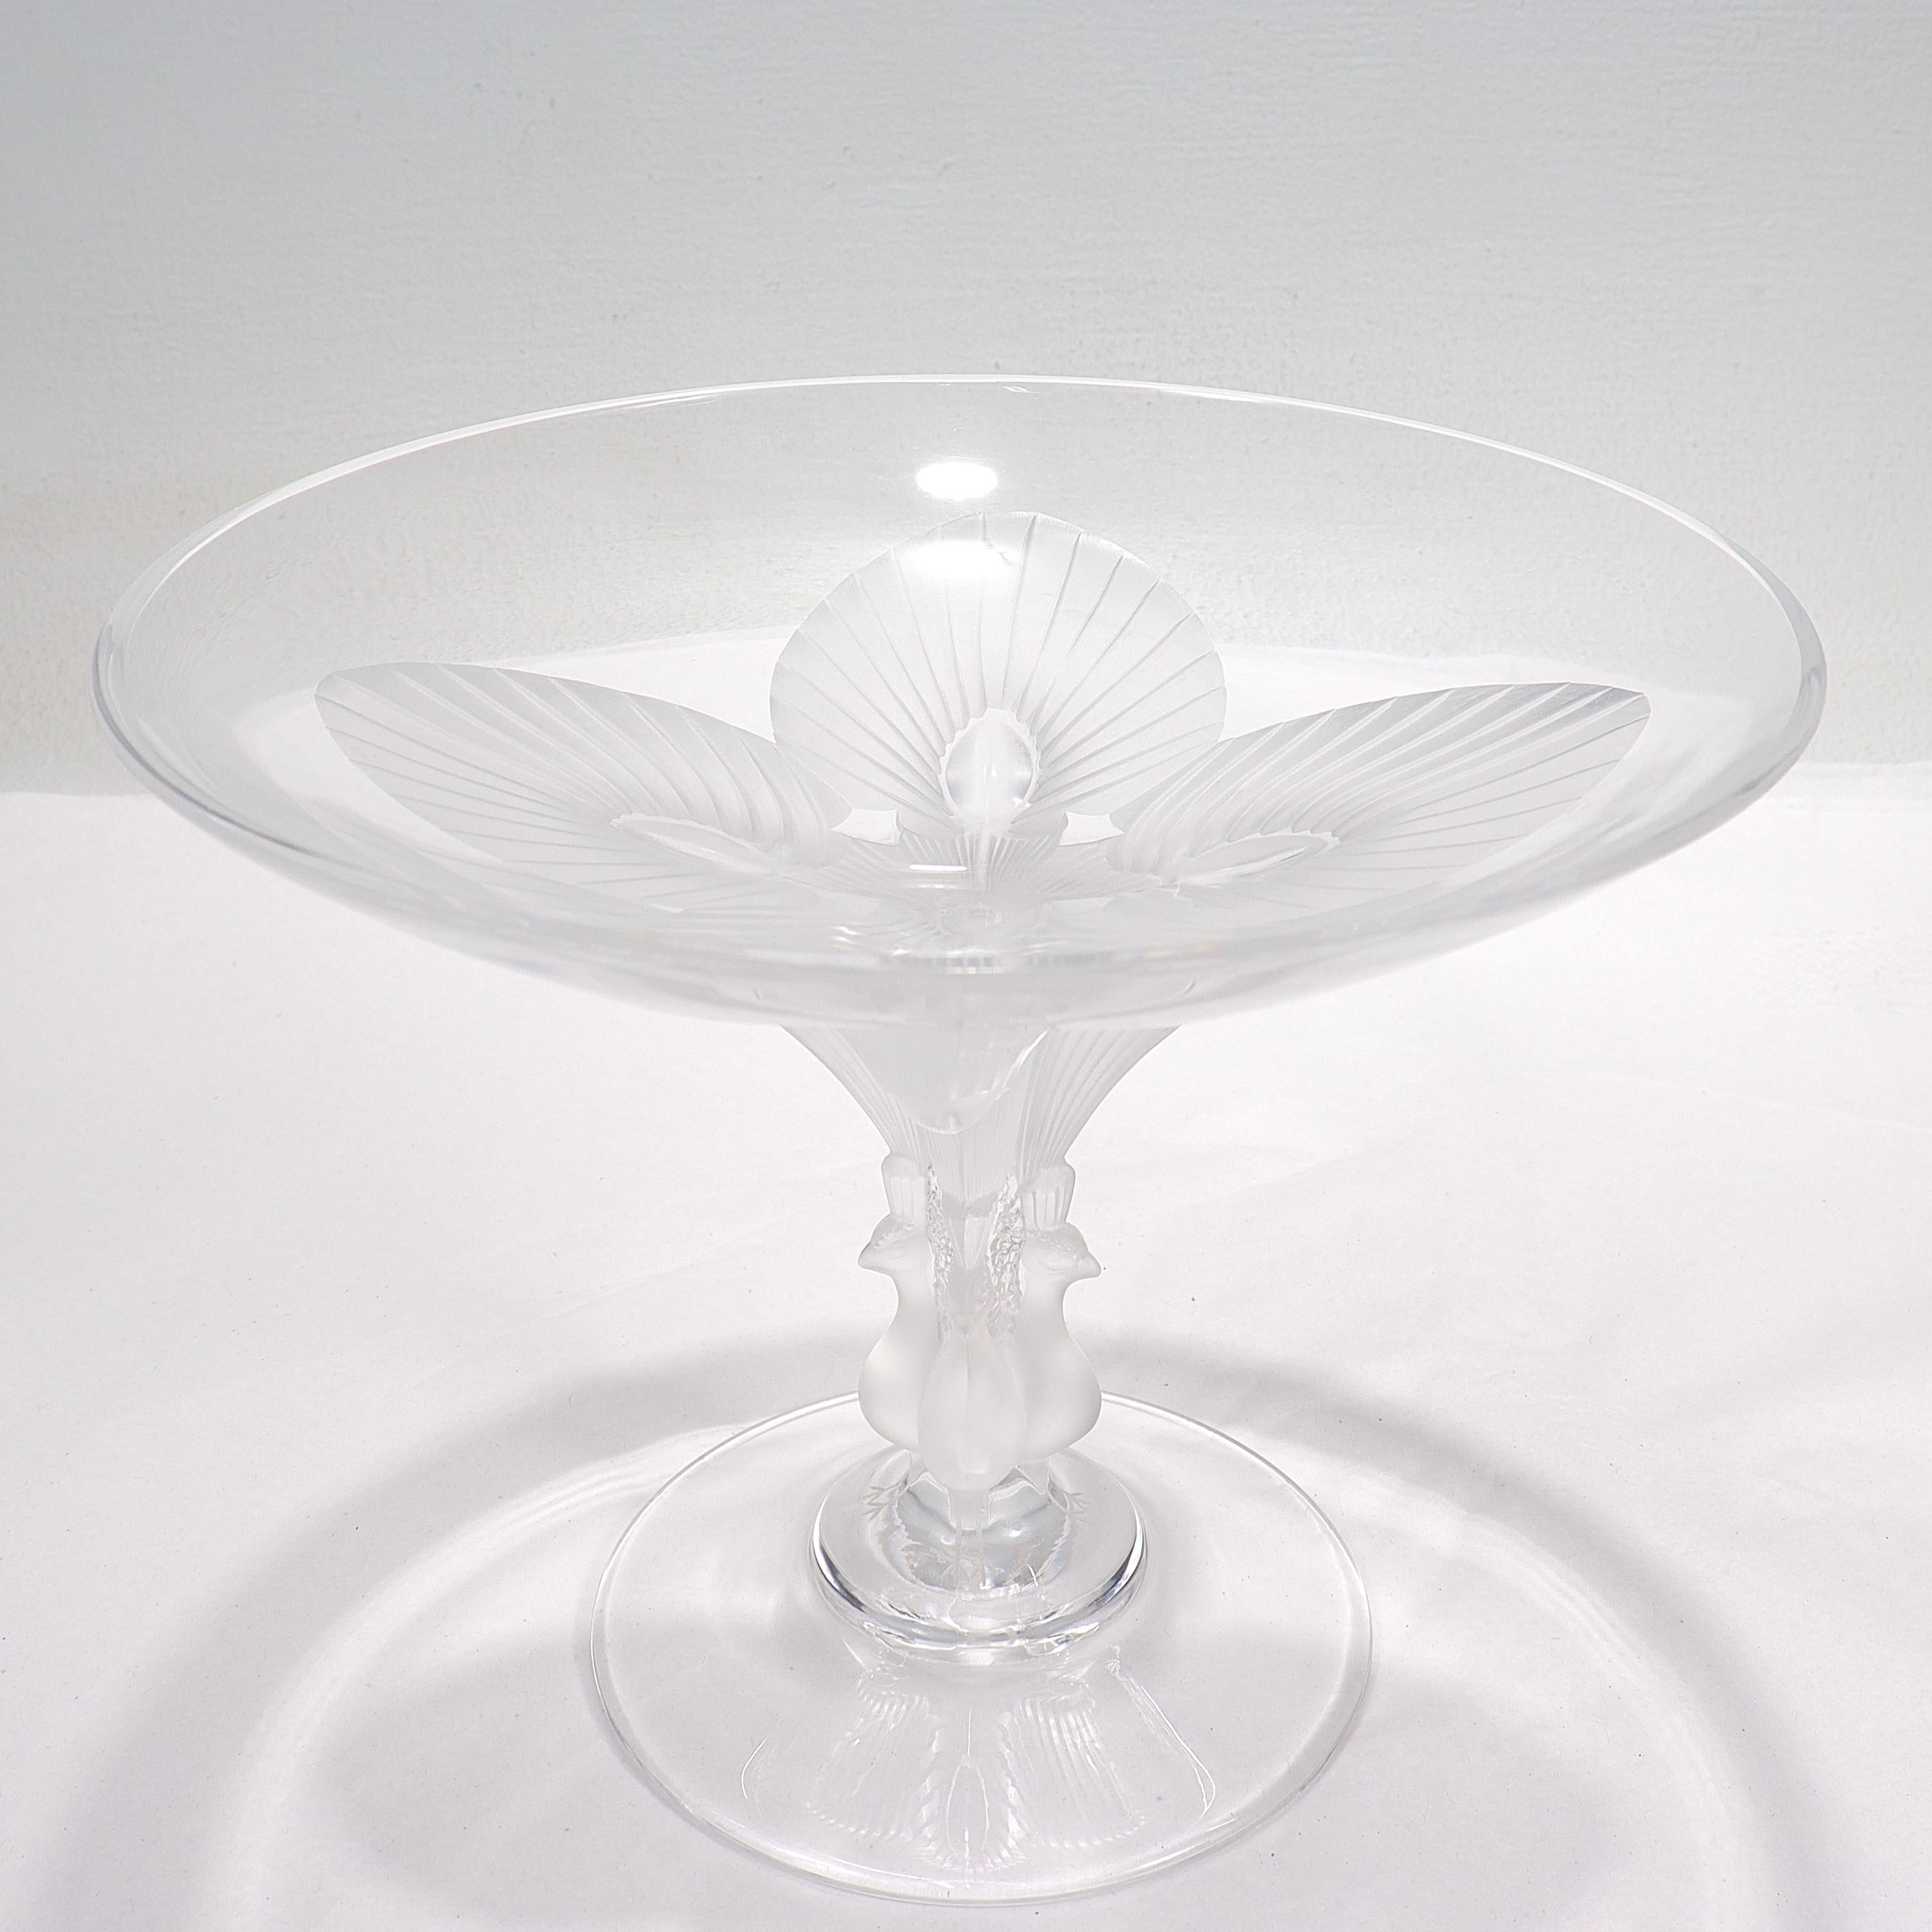 A fine French art glass compote.

By Lalique.

With frosted peacocks to the pedestal that terminates in a frosted flower to the bottom of the bowl.

Simply a wonderful piece from the world's premier art glass house!

Date:
20th